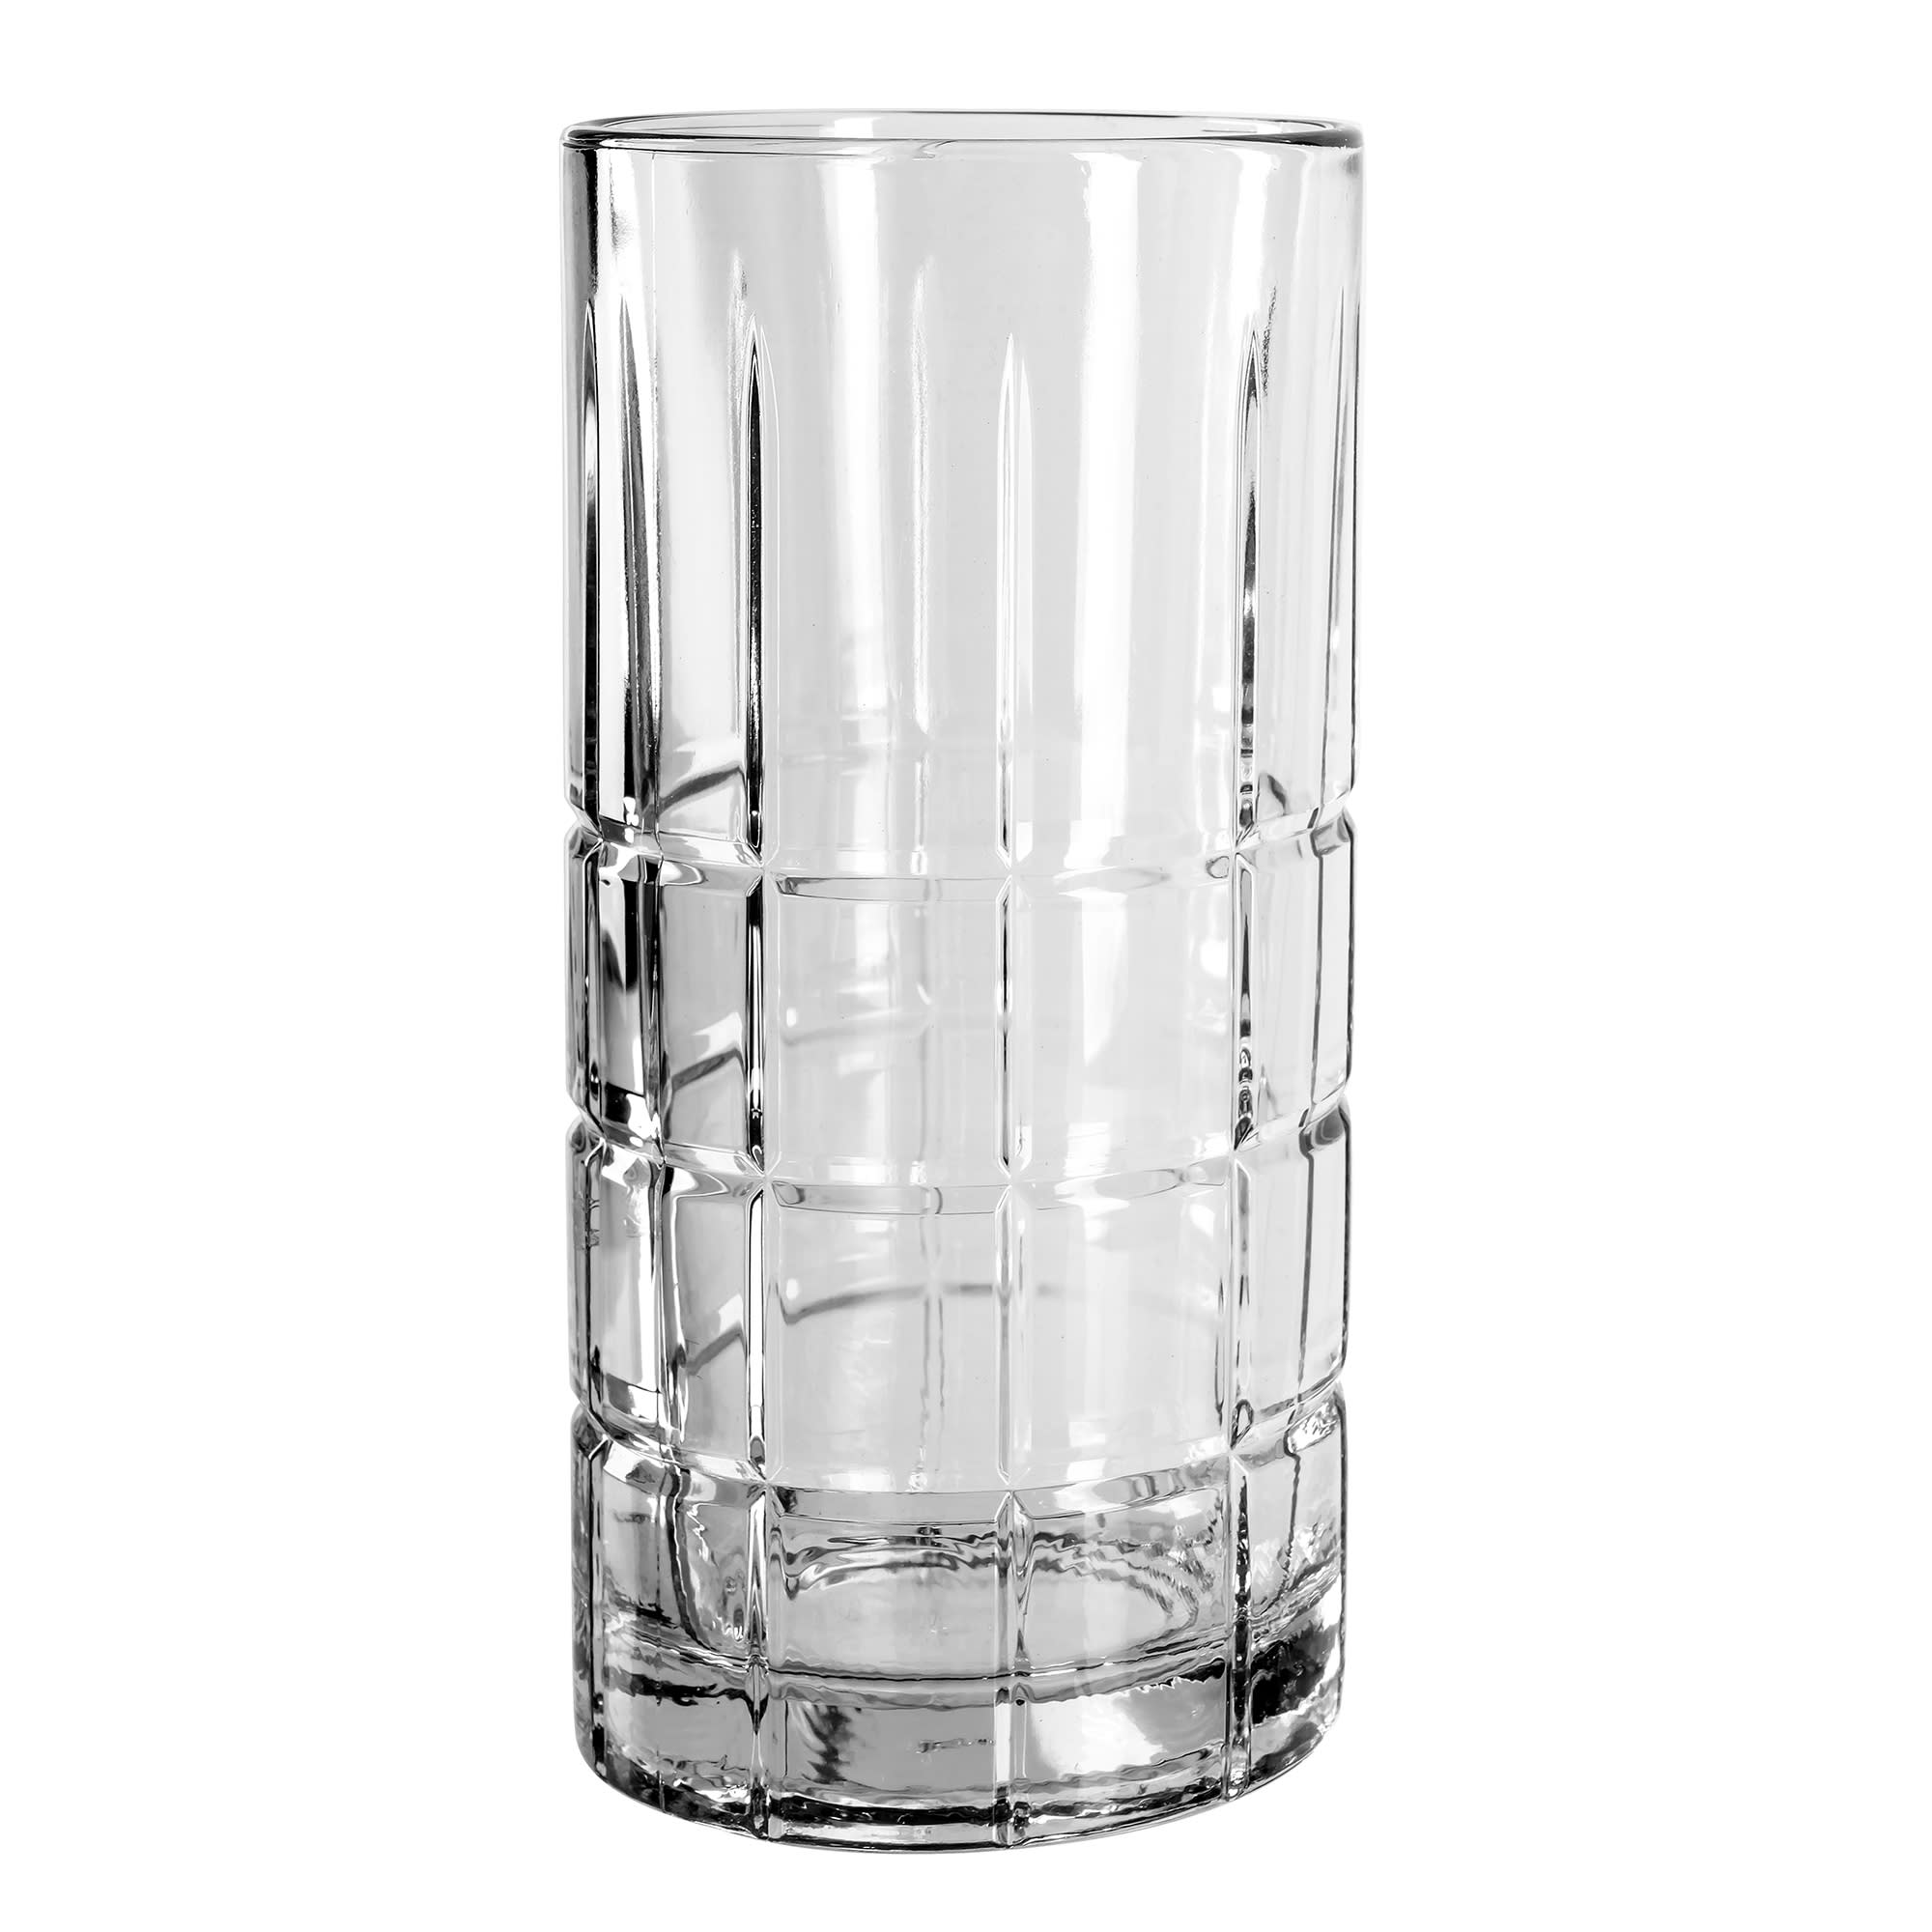 Manchester Drinking Glasses, 16 oz (Set of 4), Clear, 4 Count